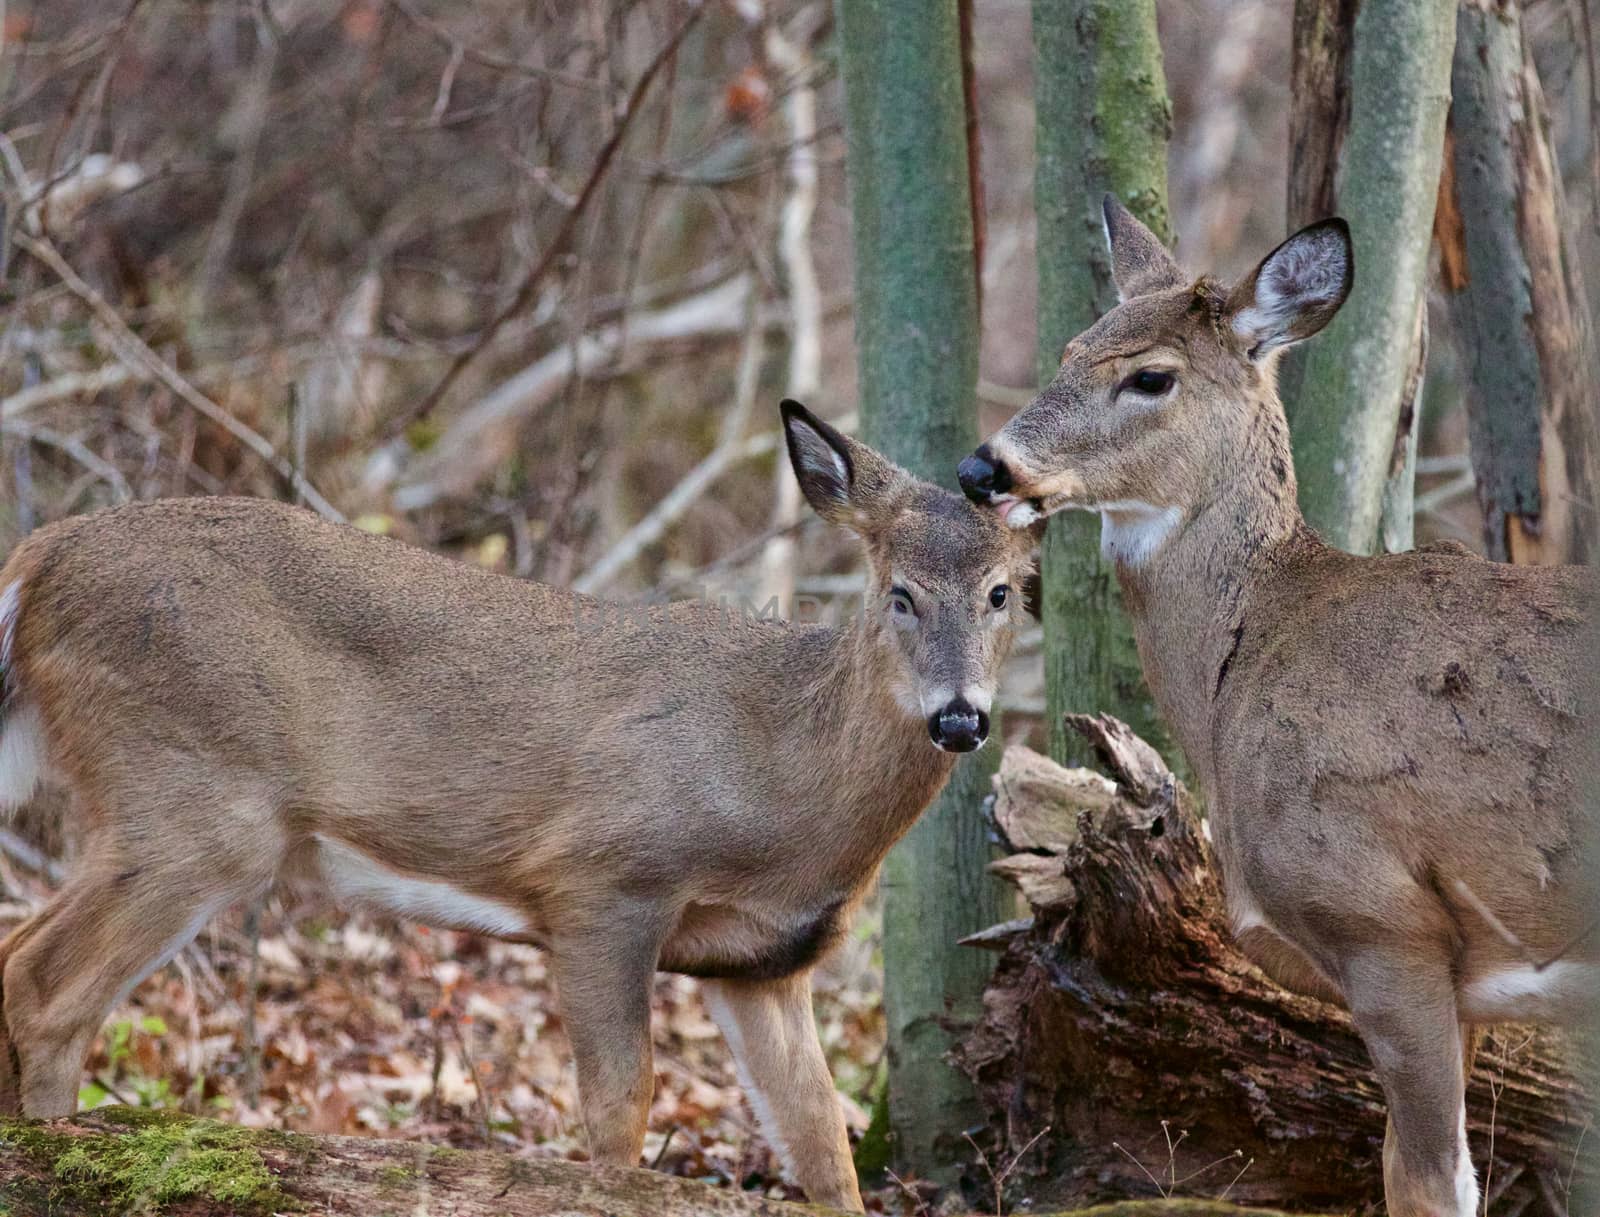 Cute pair of the wild deers in the forest